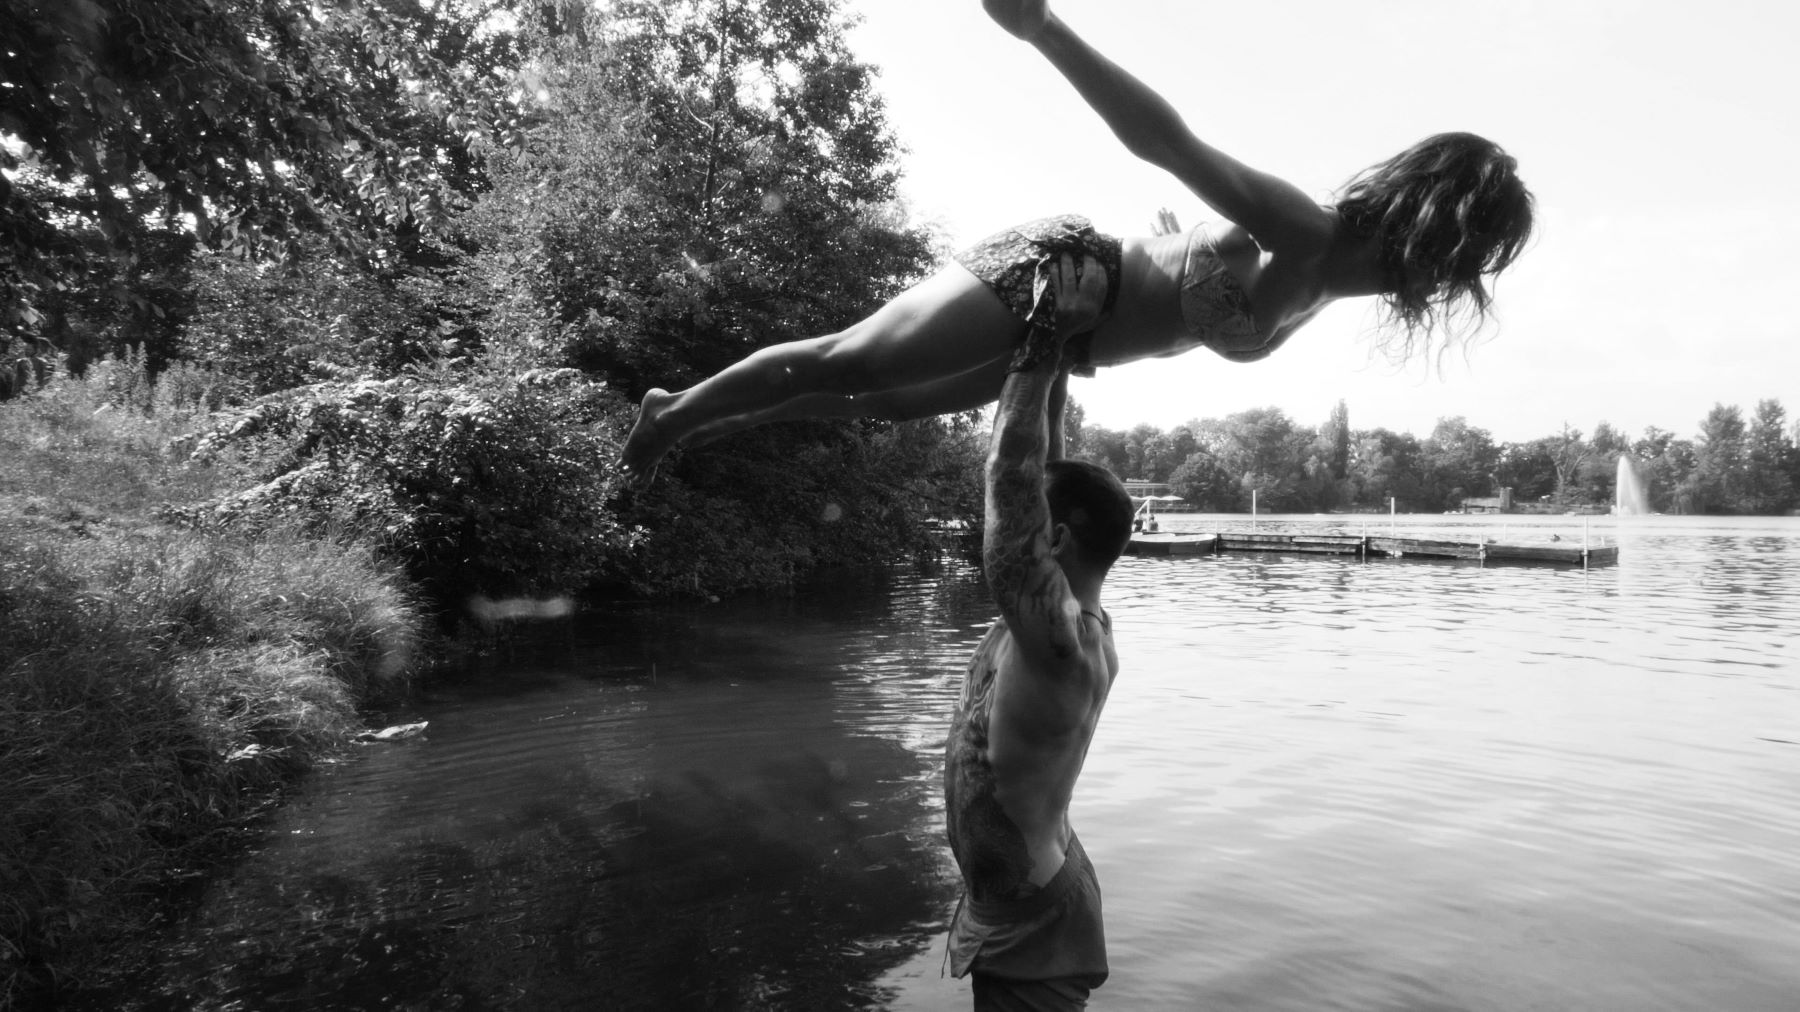 A couple performing the Lake Lift in preparation of the Lake Lure Dirty Dancing Festival